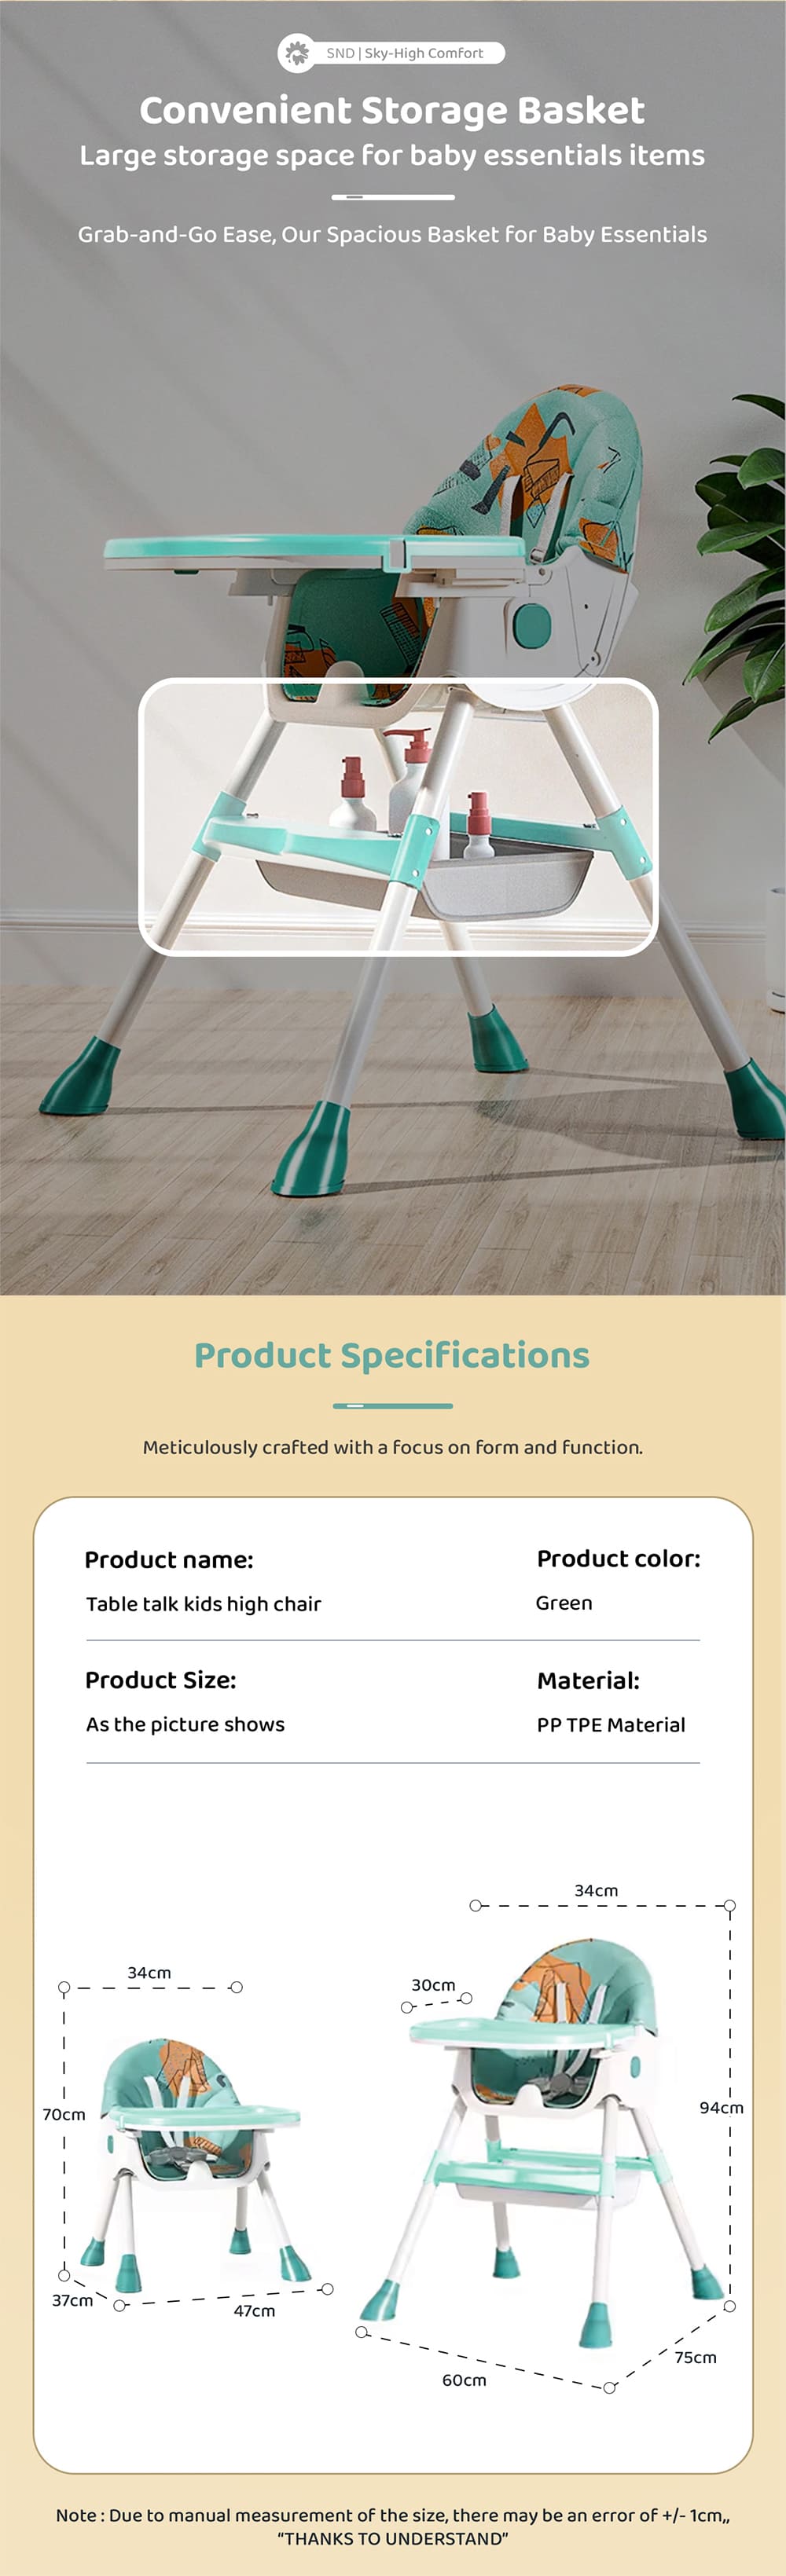 Specification of Table Talk Baby High Chair